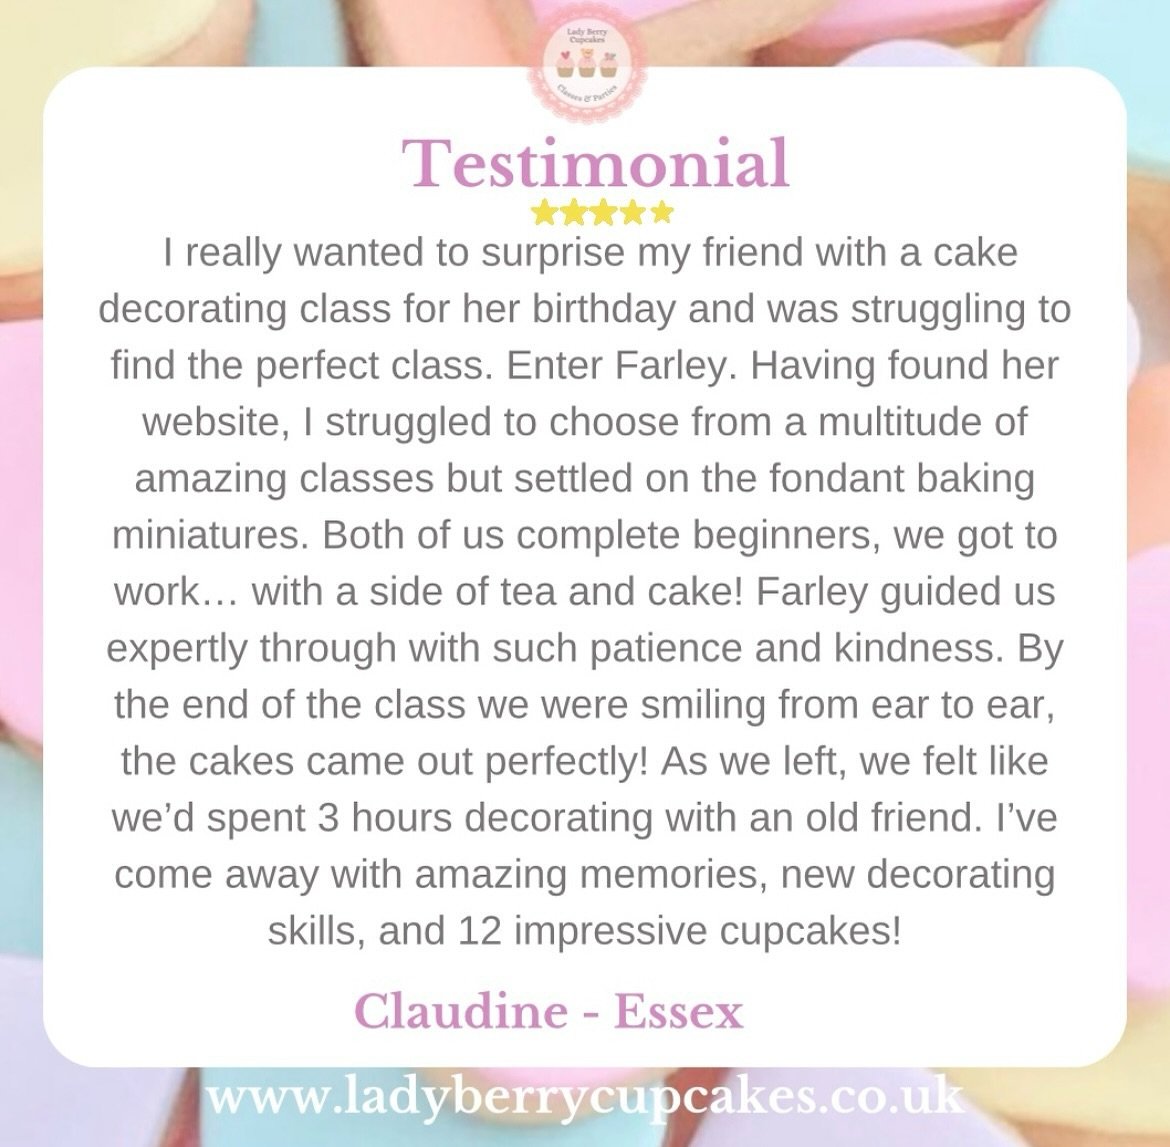 🥰 Does your Bestie love you this much?! Such a cute thing to do for your best friend and you get to have fun too,making memories, learning to create  delicious cupcakes to take home and gift or indulge in!! 😜

🩷 Claudine and Jodie were absolutely 